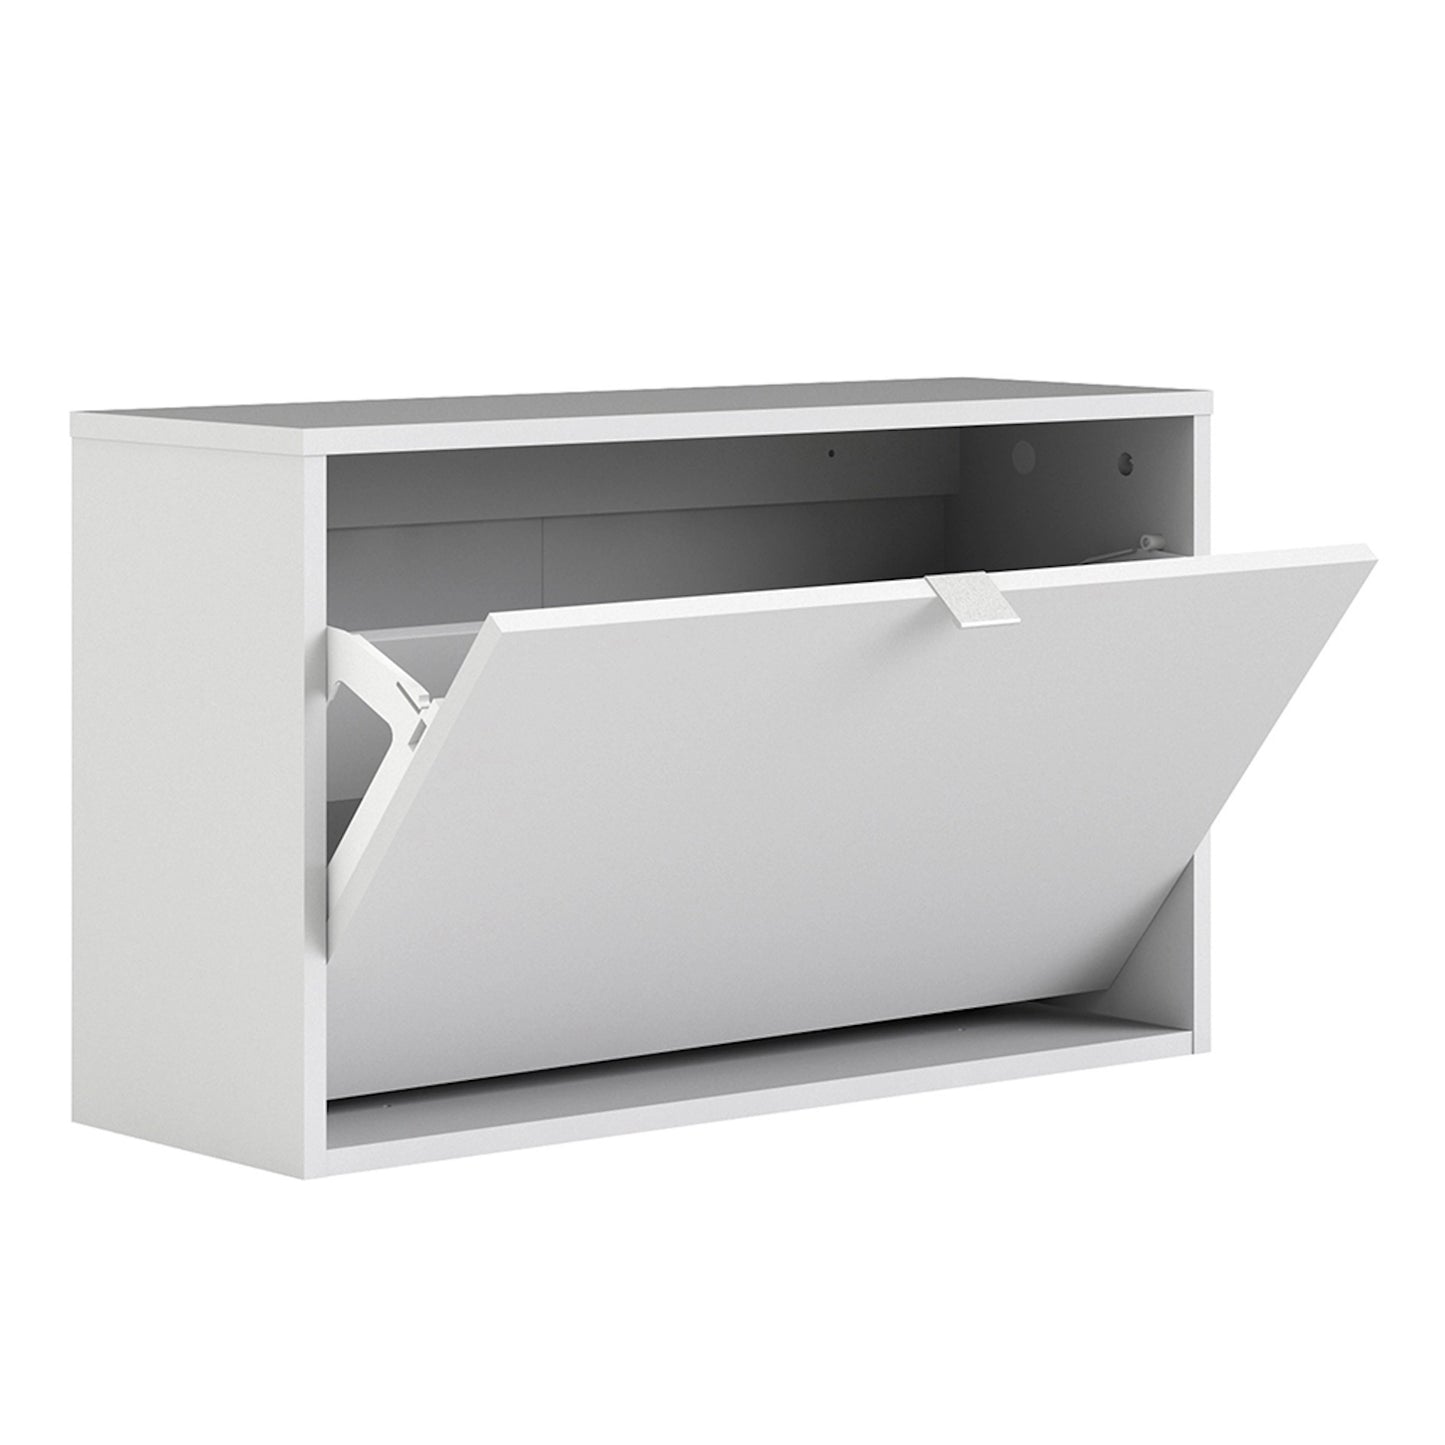 Furniture To Go Shoes Shoe Cabinet W. 1 Tilting Door & 2 Layers in White